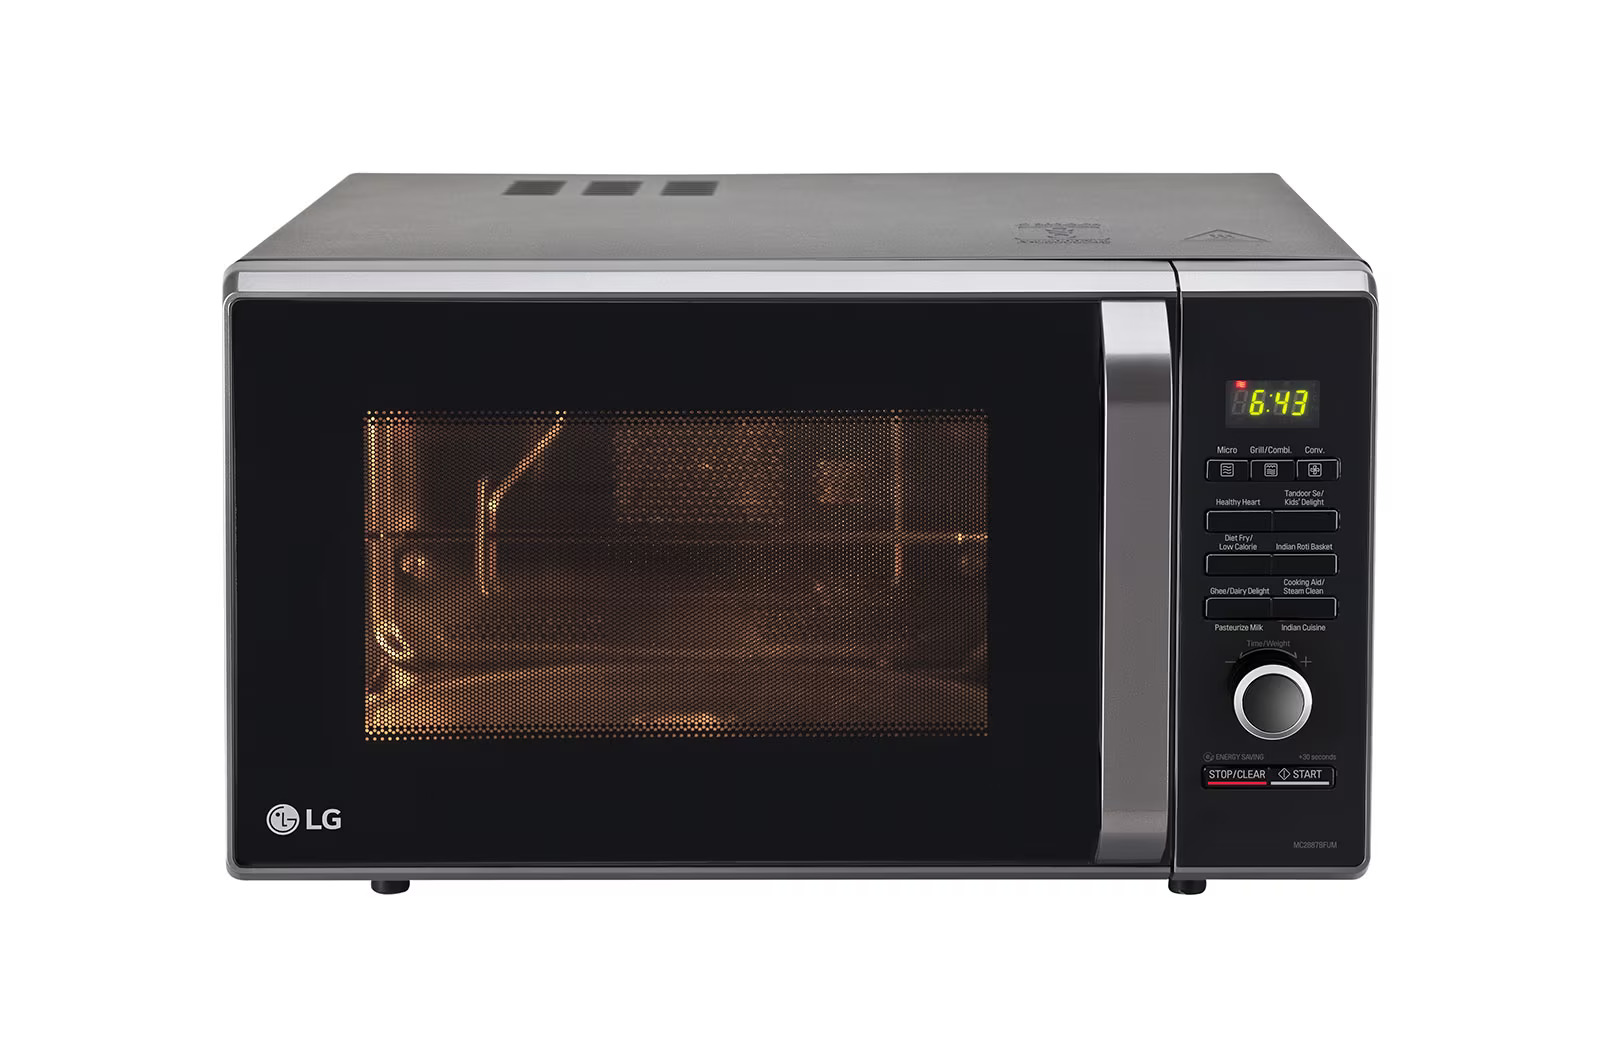 LG best convection microwave in India